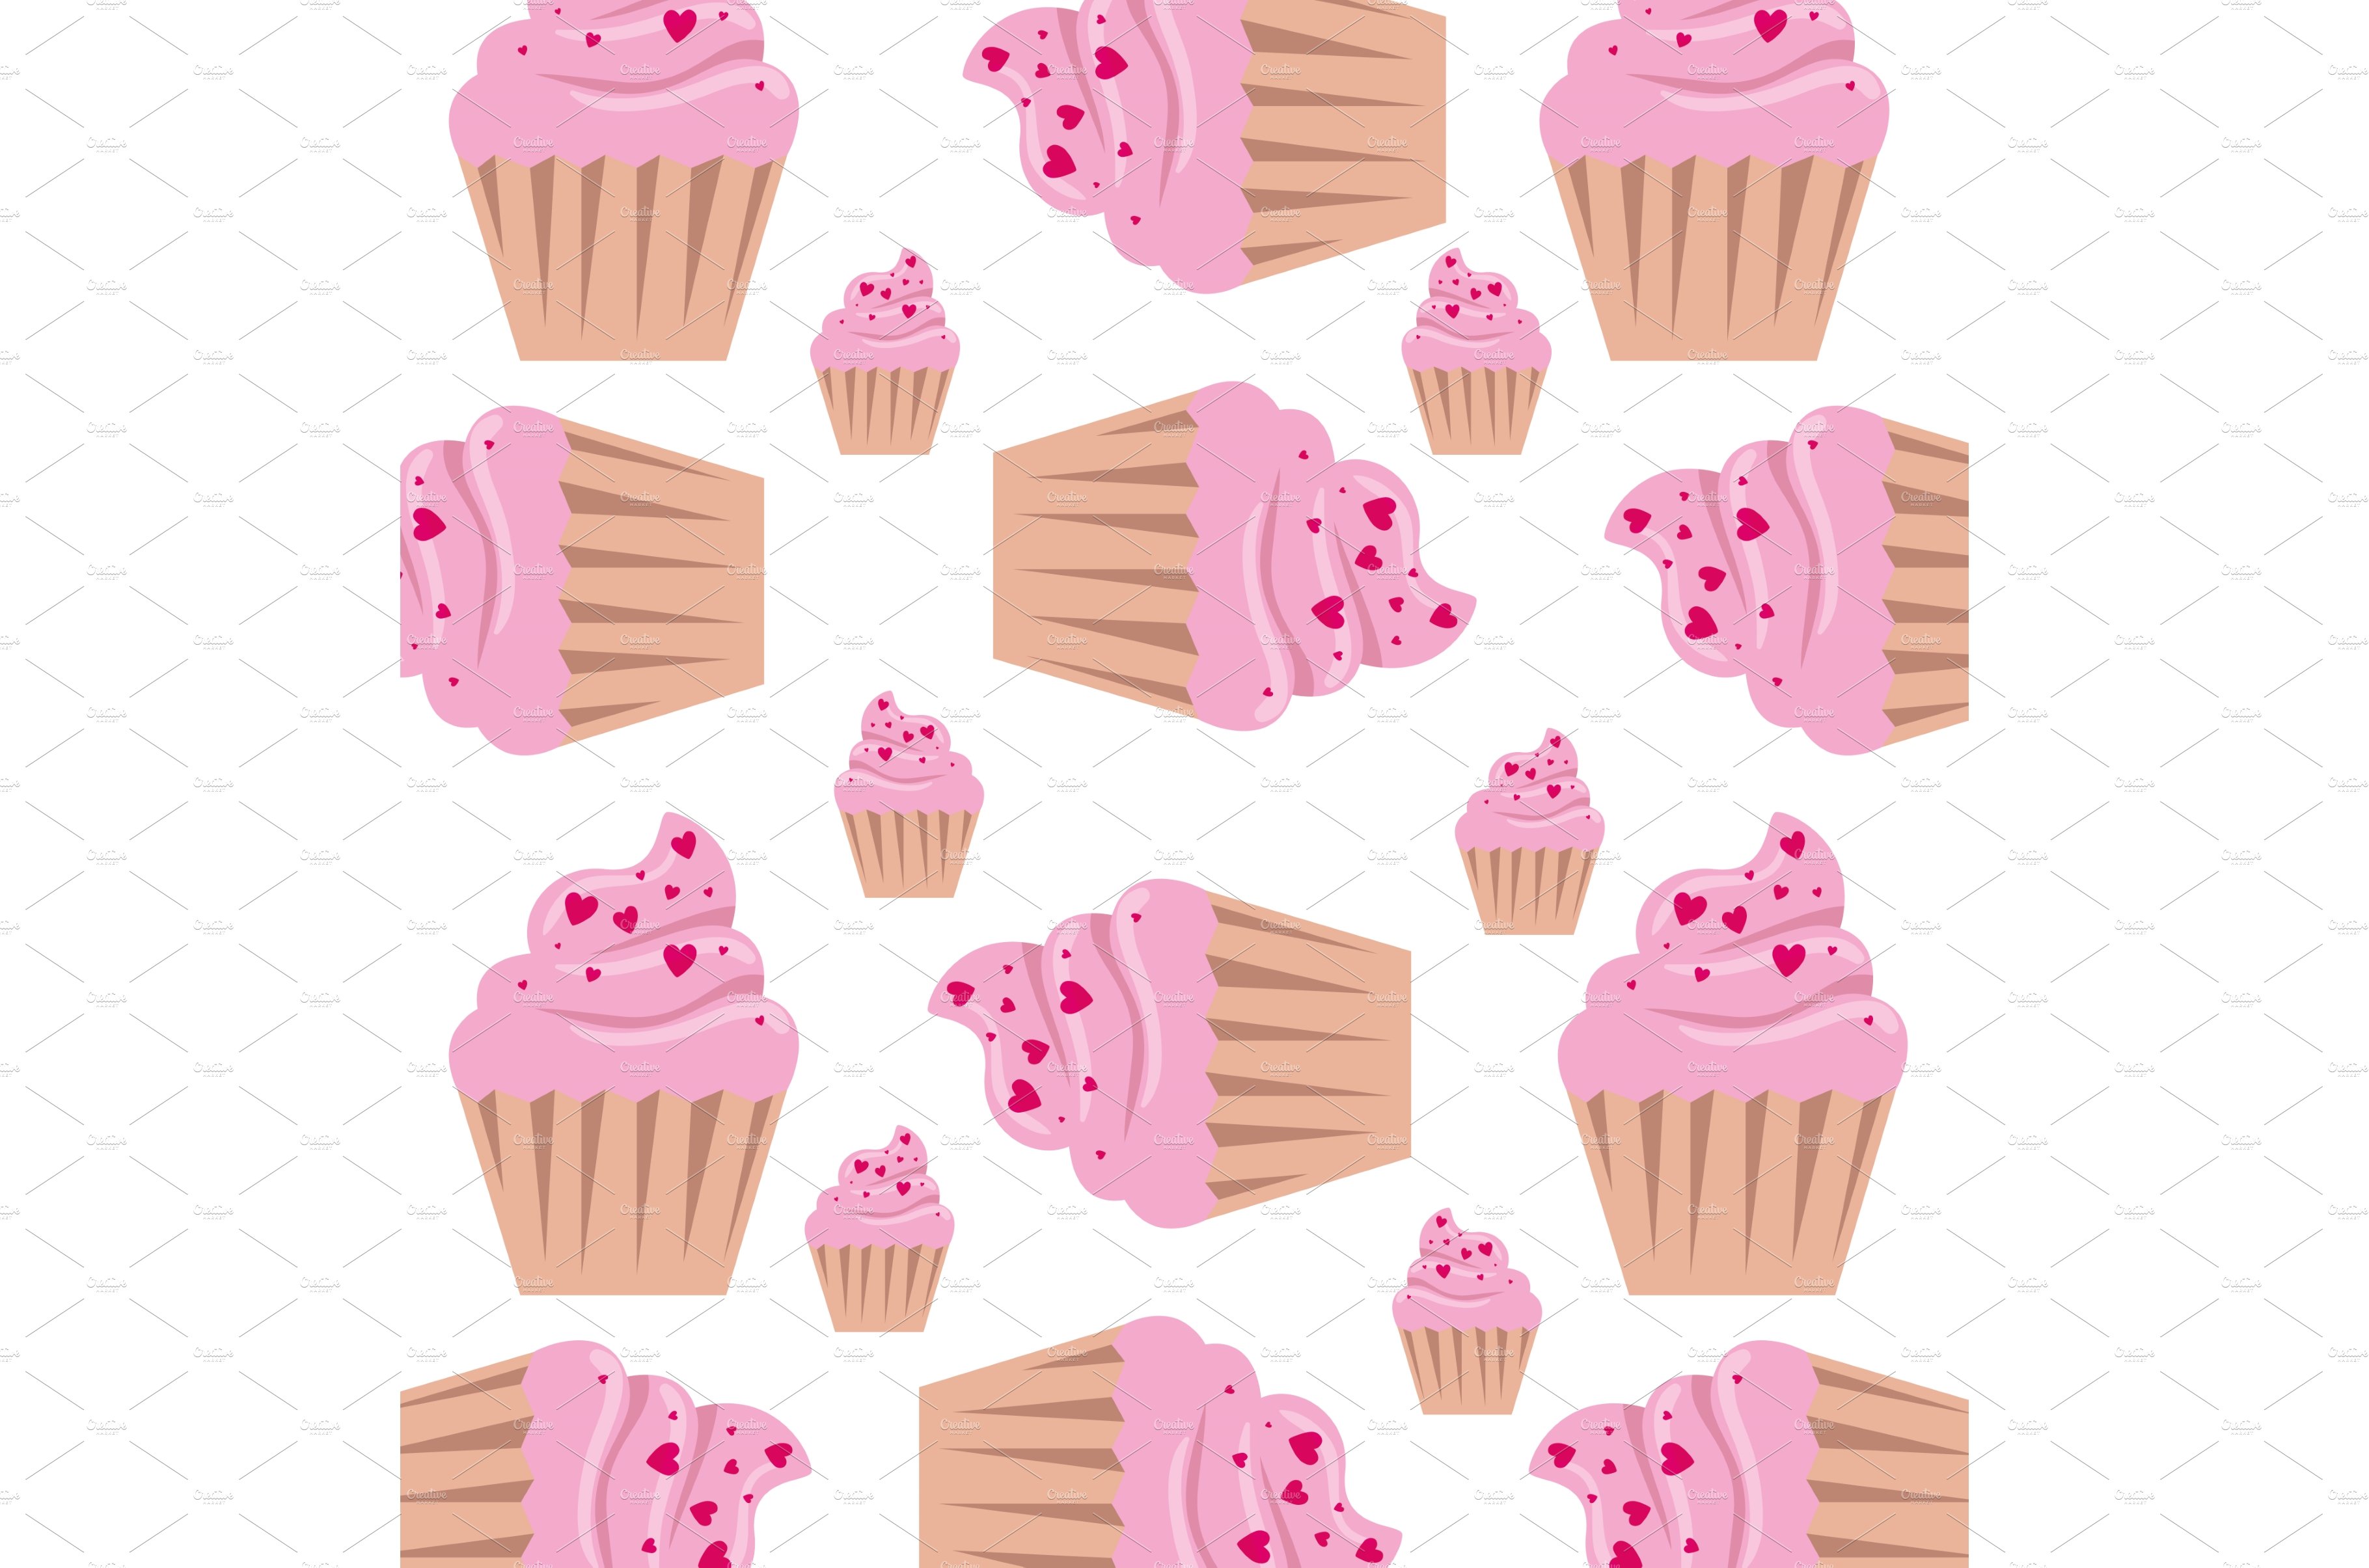 background of cupcakes pastry icons cover image.